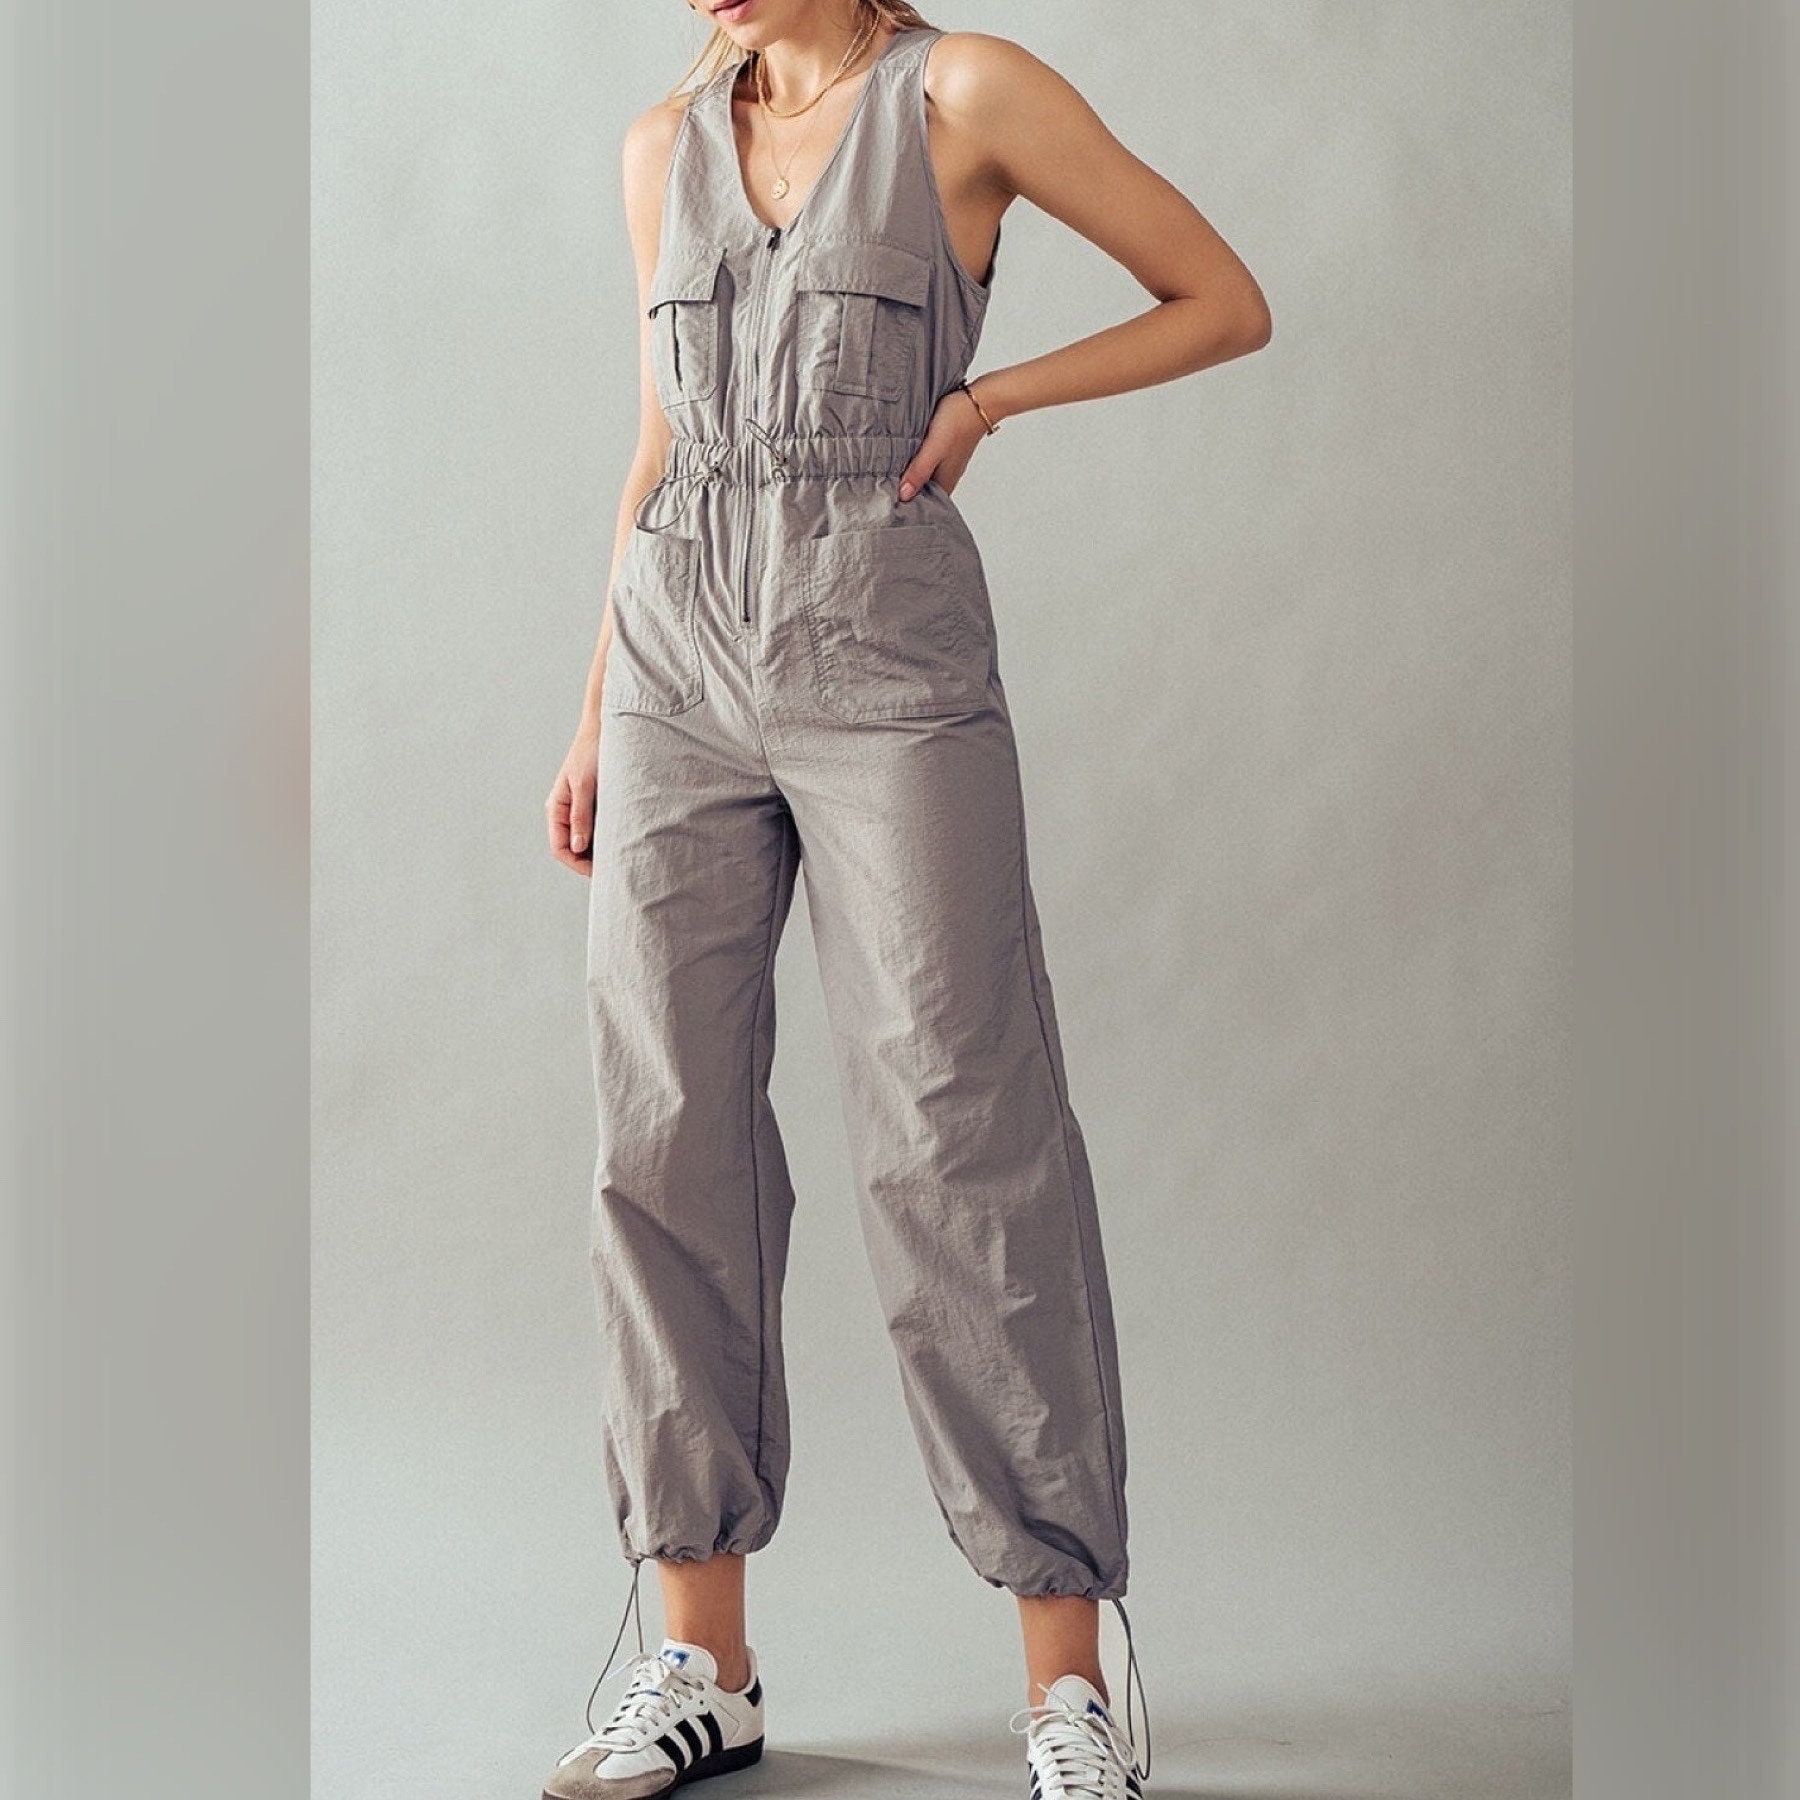 Women's Cargo Pocket Belted Jumpsuit Casual Solid Joggers Slim Romper  Playsuit